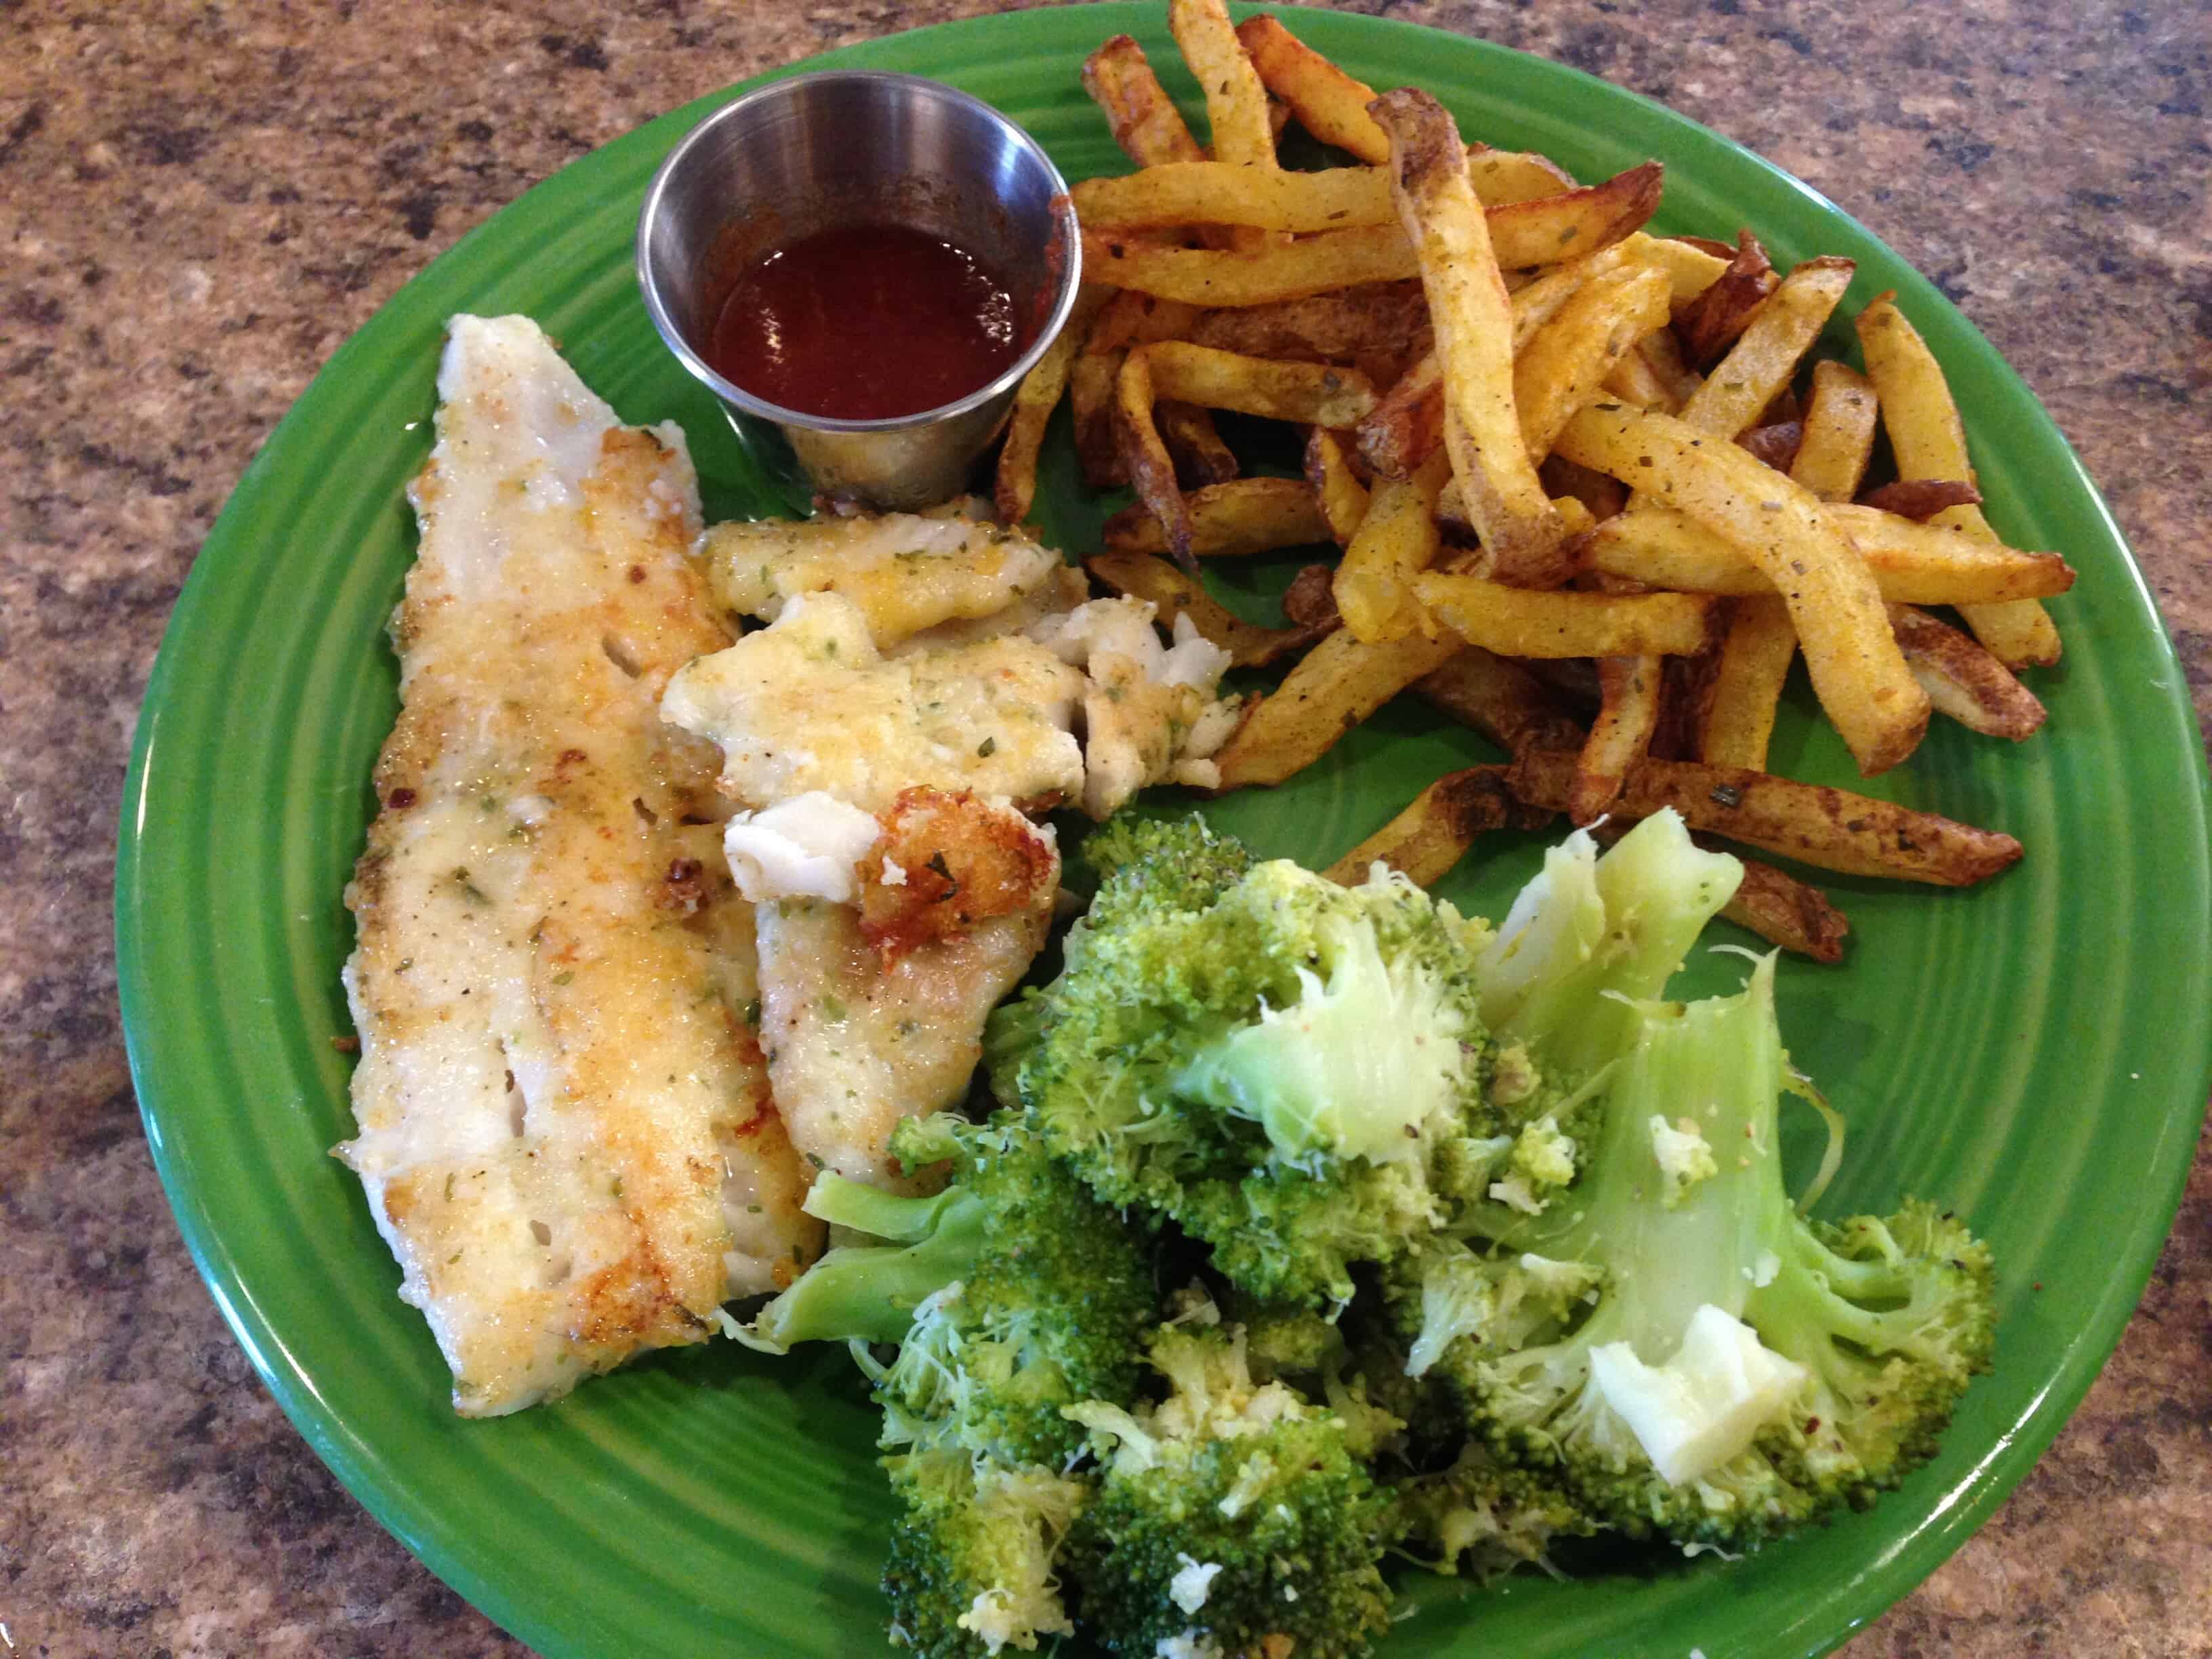 Fresh fish, steamed broccoli, and air fryer french fries